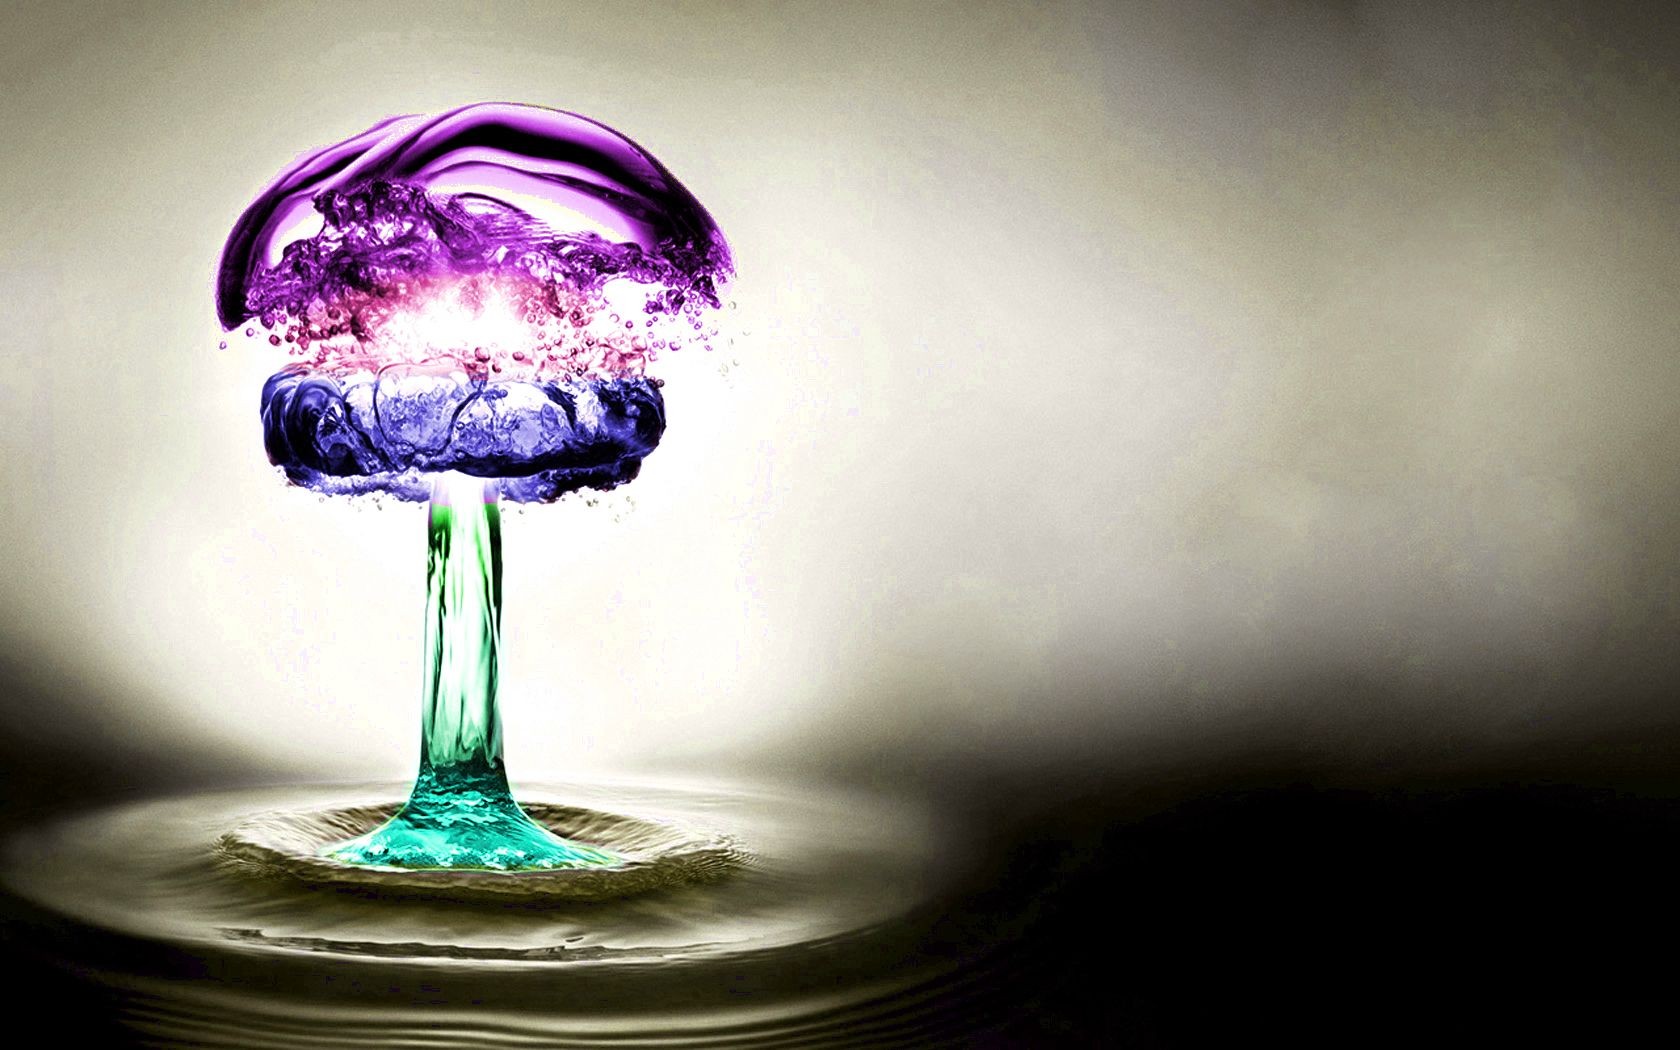 General 1680x1050 abstract water drops water colorful waves mushroom clouds ripples